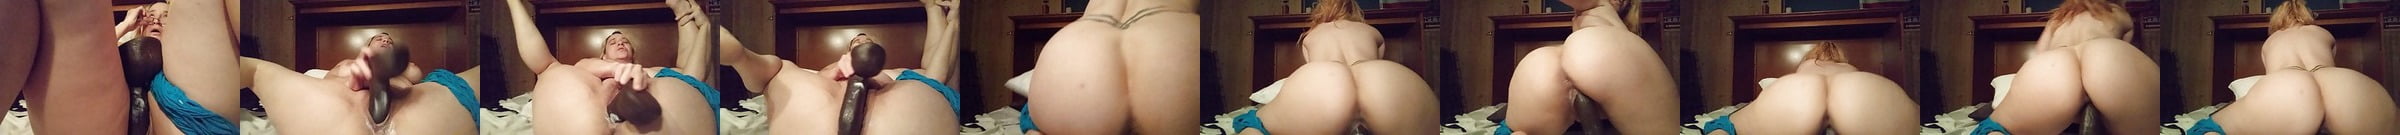 Featured Sph Cuckold Porn Videos Xhamster